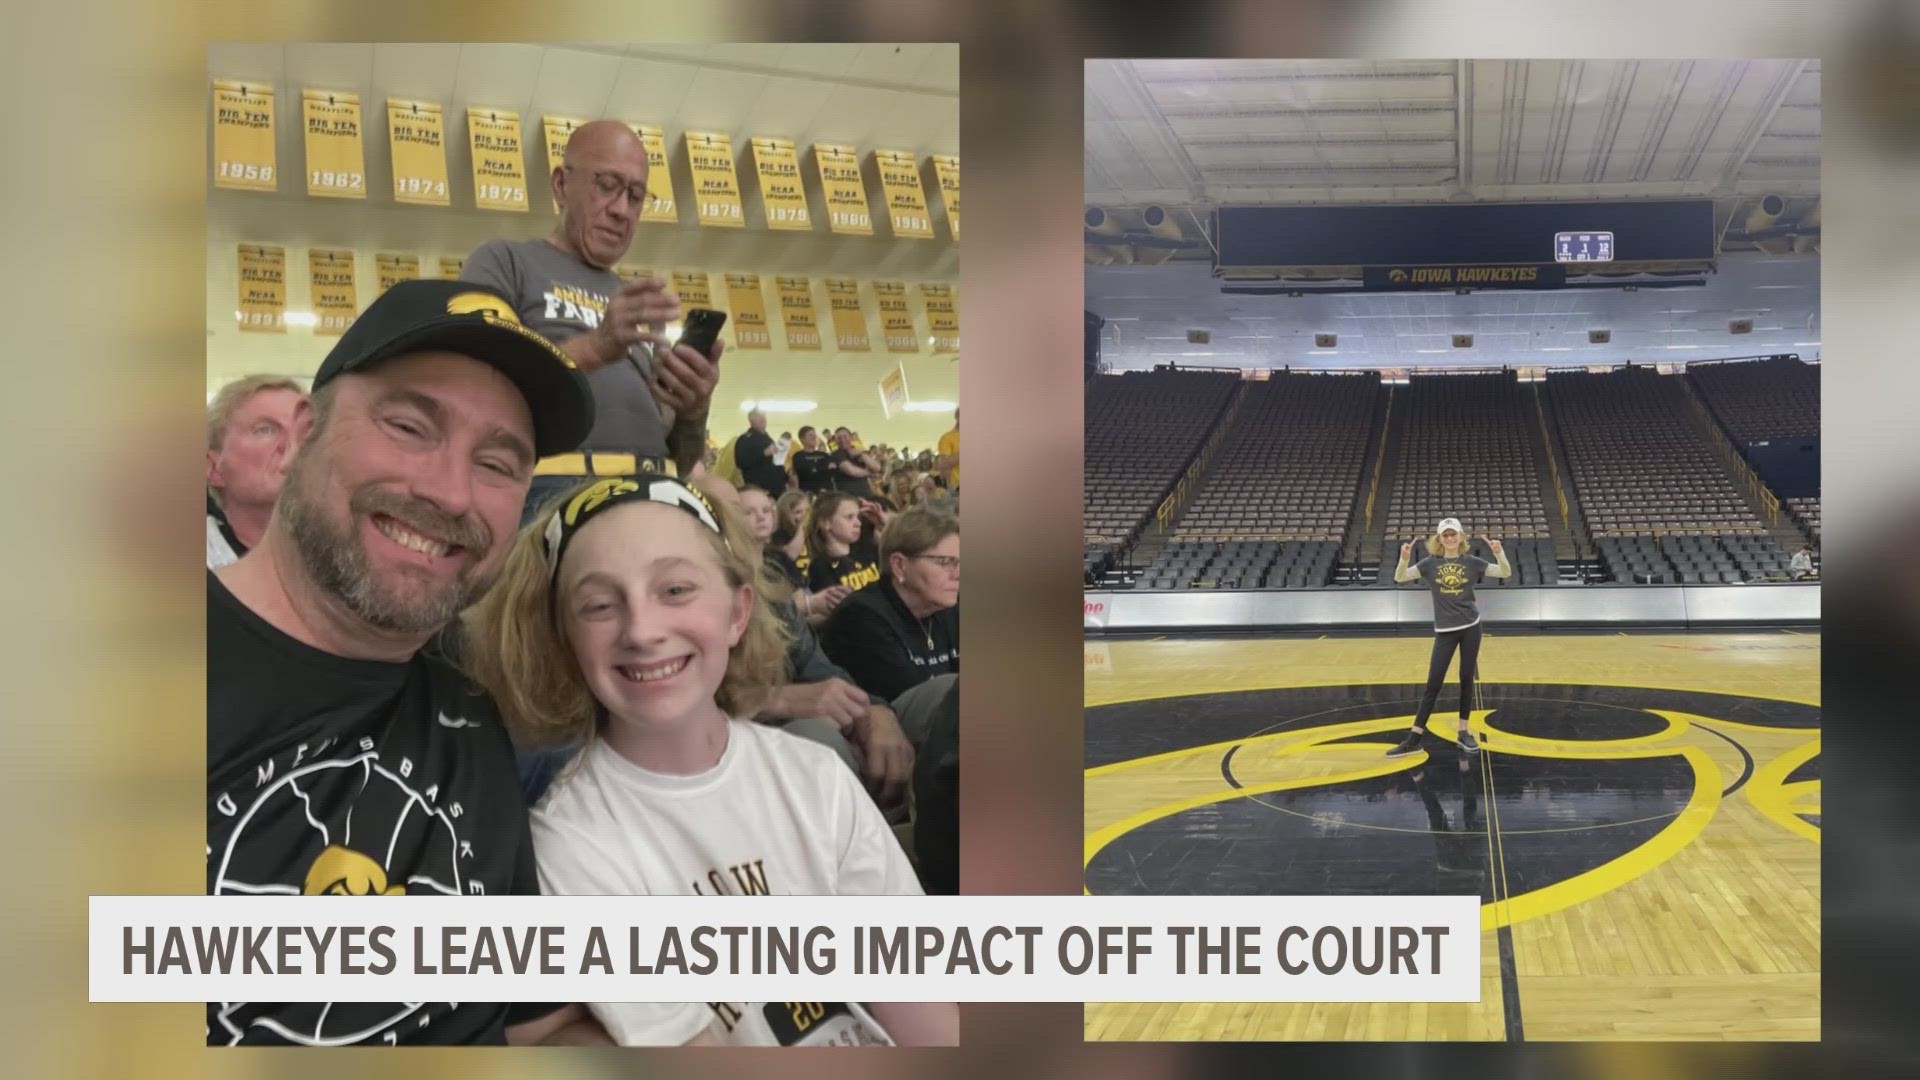 14-year-old Bailey Lux has been battling cancer for two years, and the Iowa women's basketball team has been there for her every step of the way.